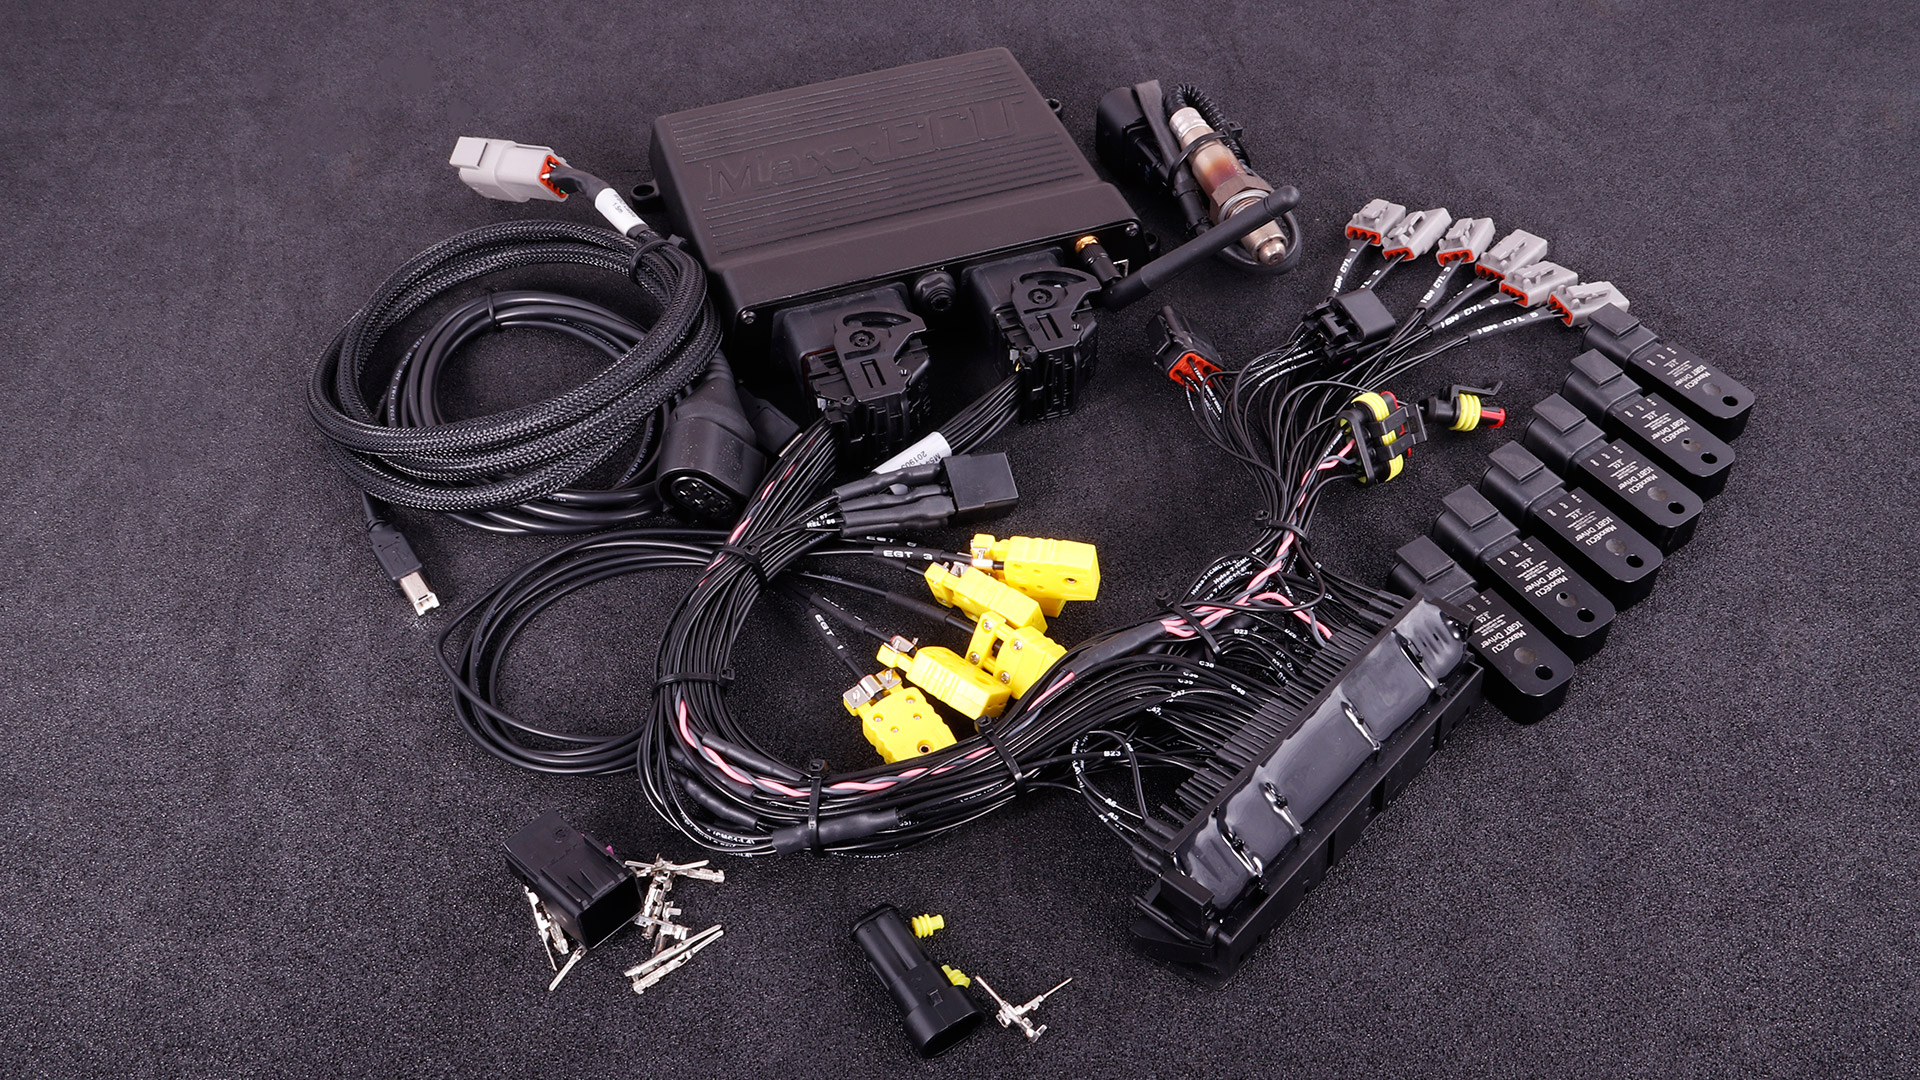 MaxxECU RACE plugin for BMW M54 complete kit with Bosch LSU 4.2 sensor, IGBT drivers and accessories